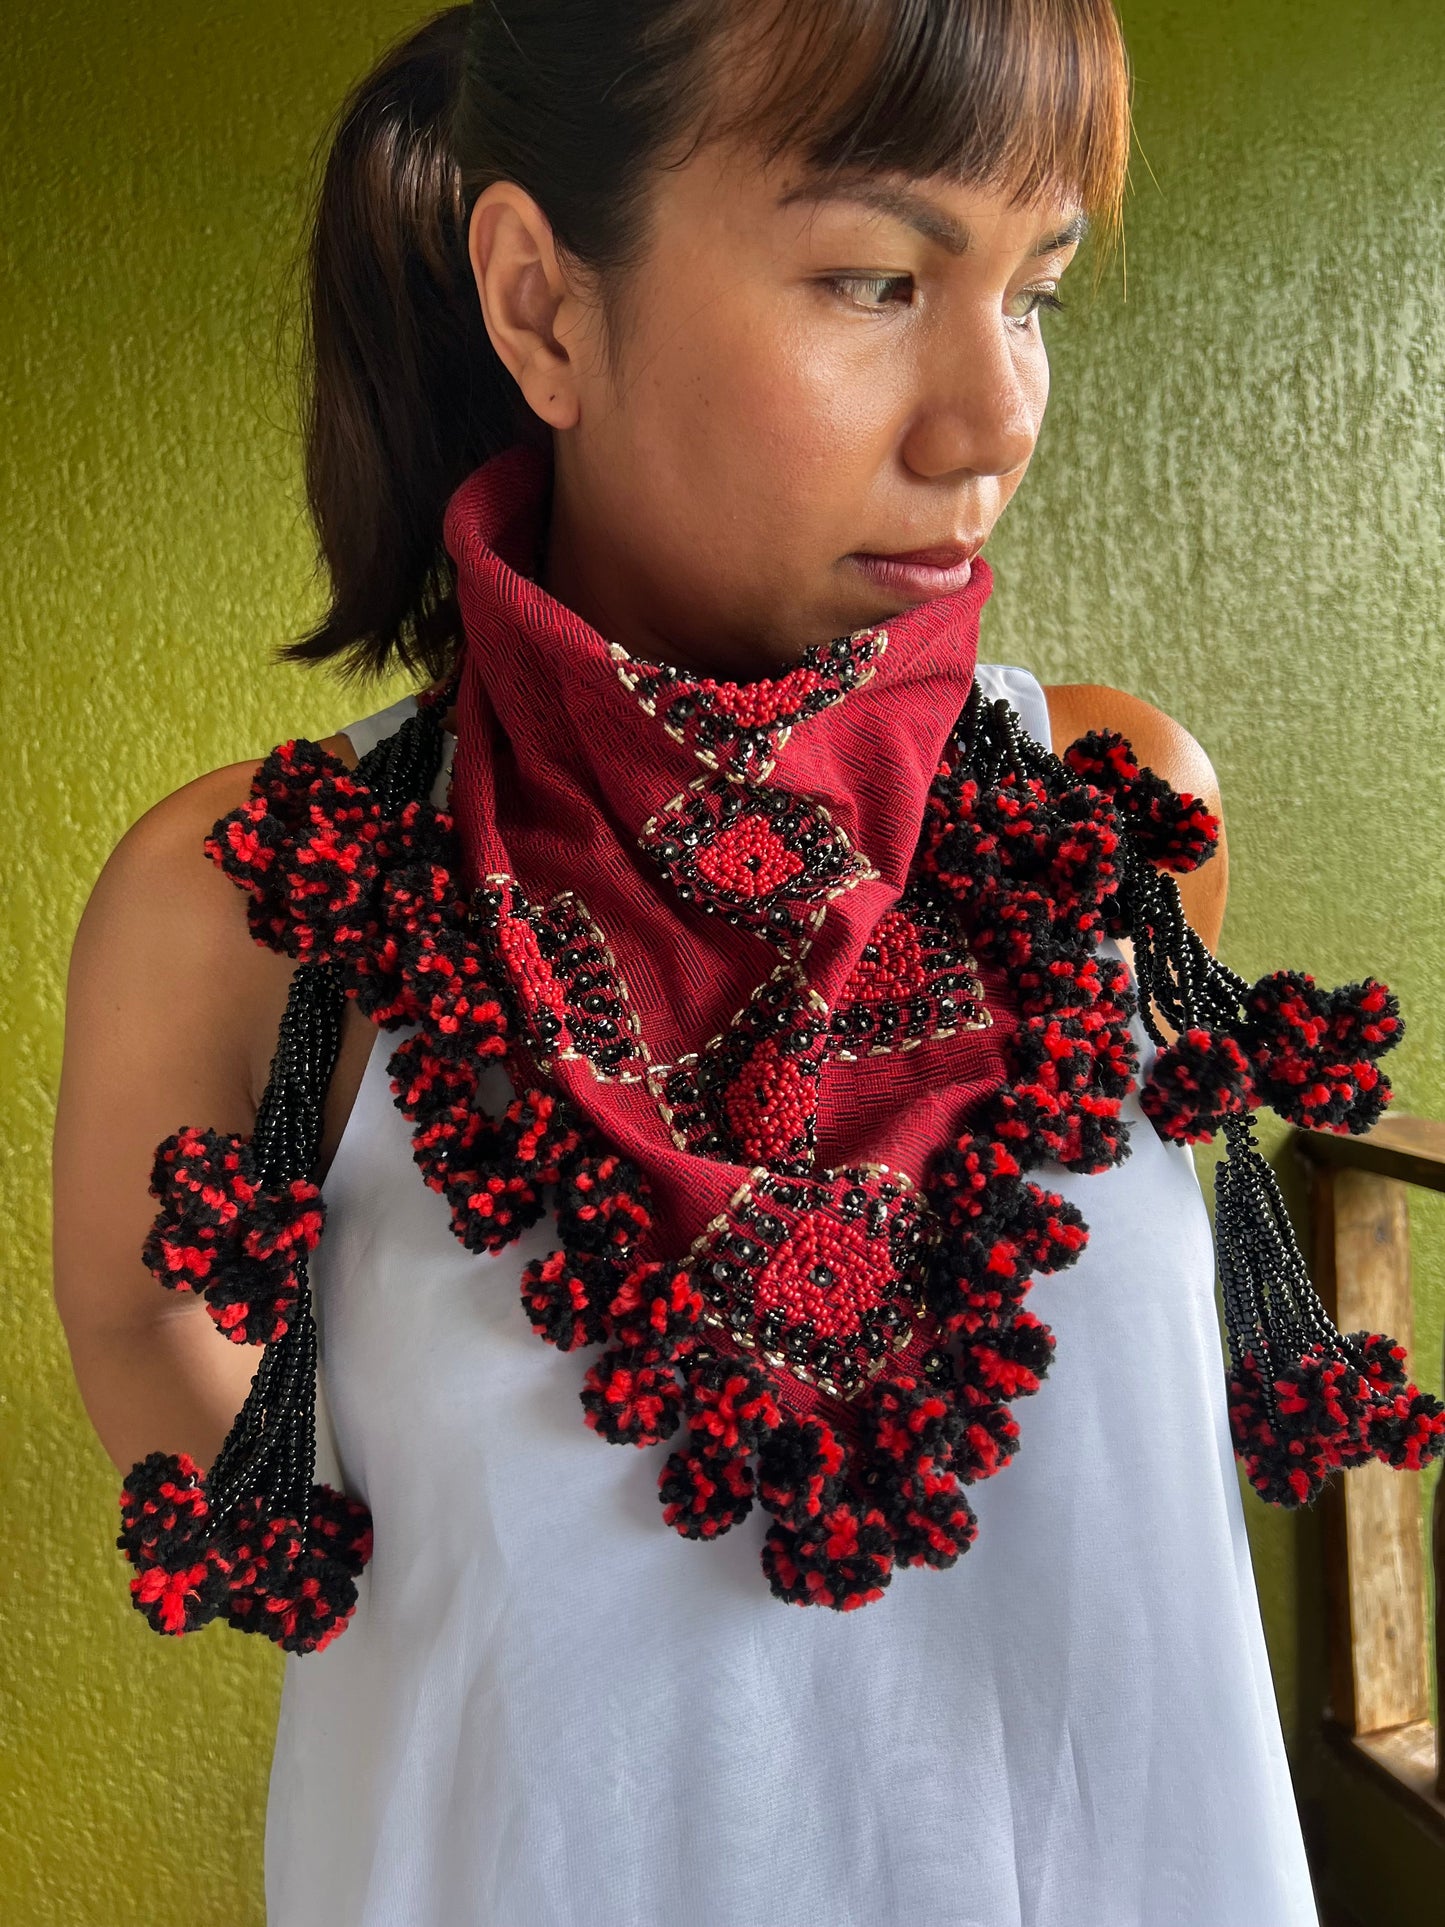 Tangkulo Scarf of Bagobo in Digos in Red